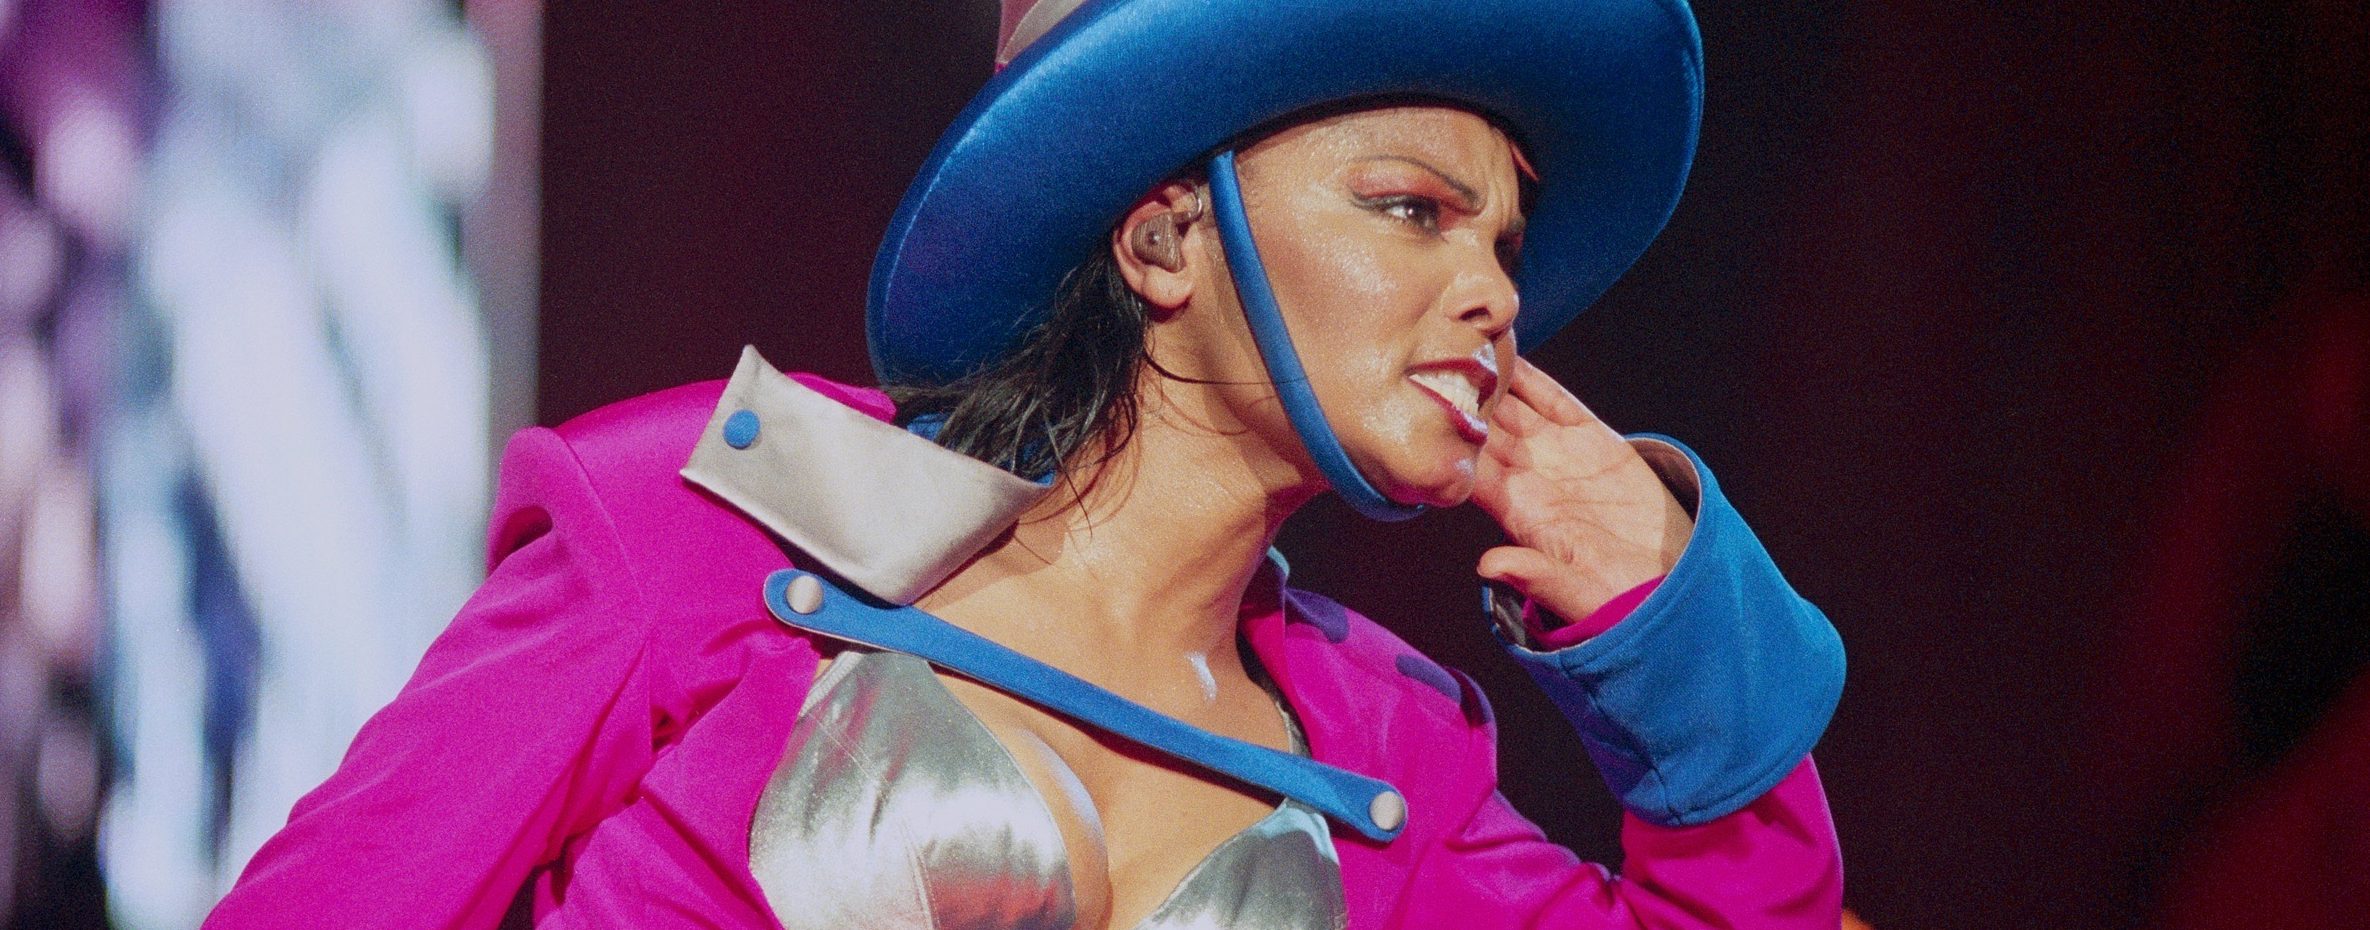 Janet Jackson performs on stage in 1998. (Photo by Phil Dent/Redferns)